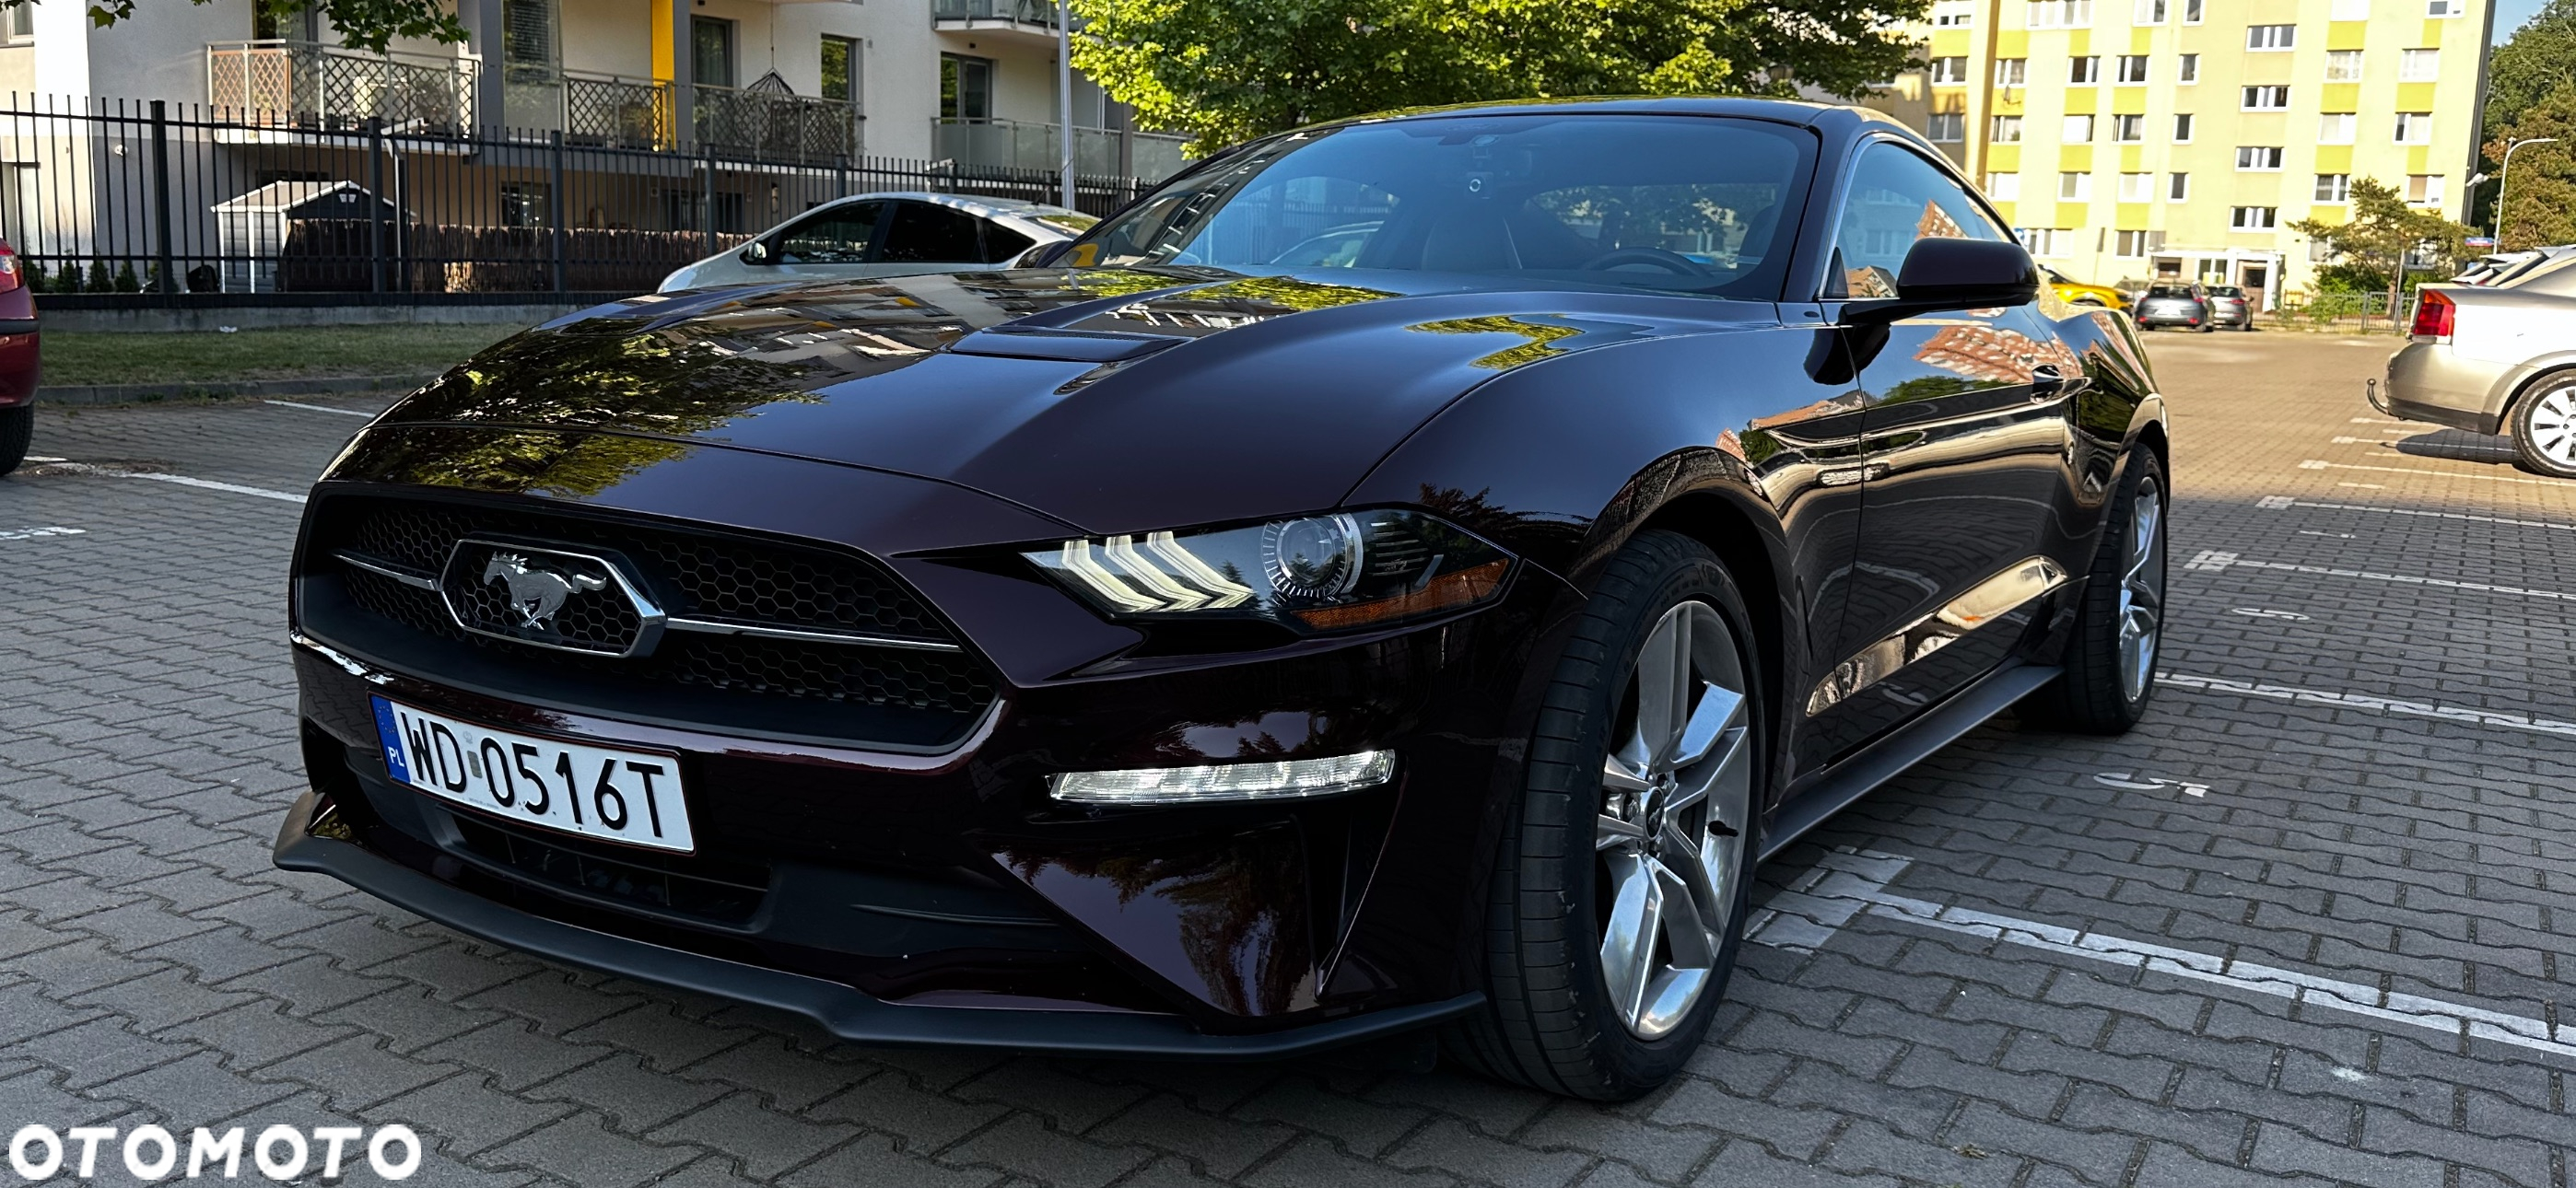 Ford Mustang 2.3 EcoBoost - 12